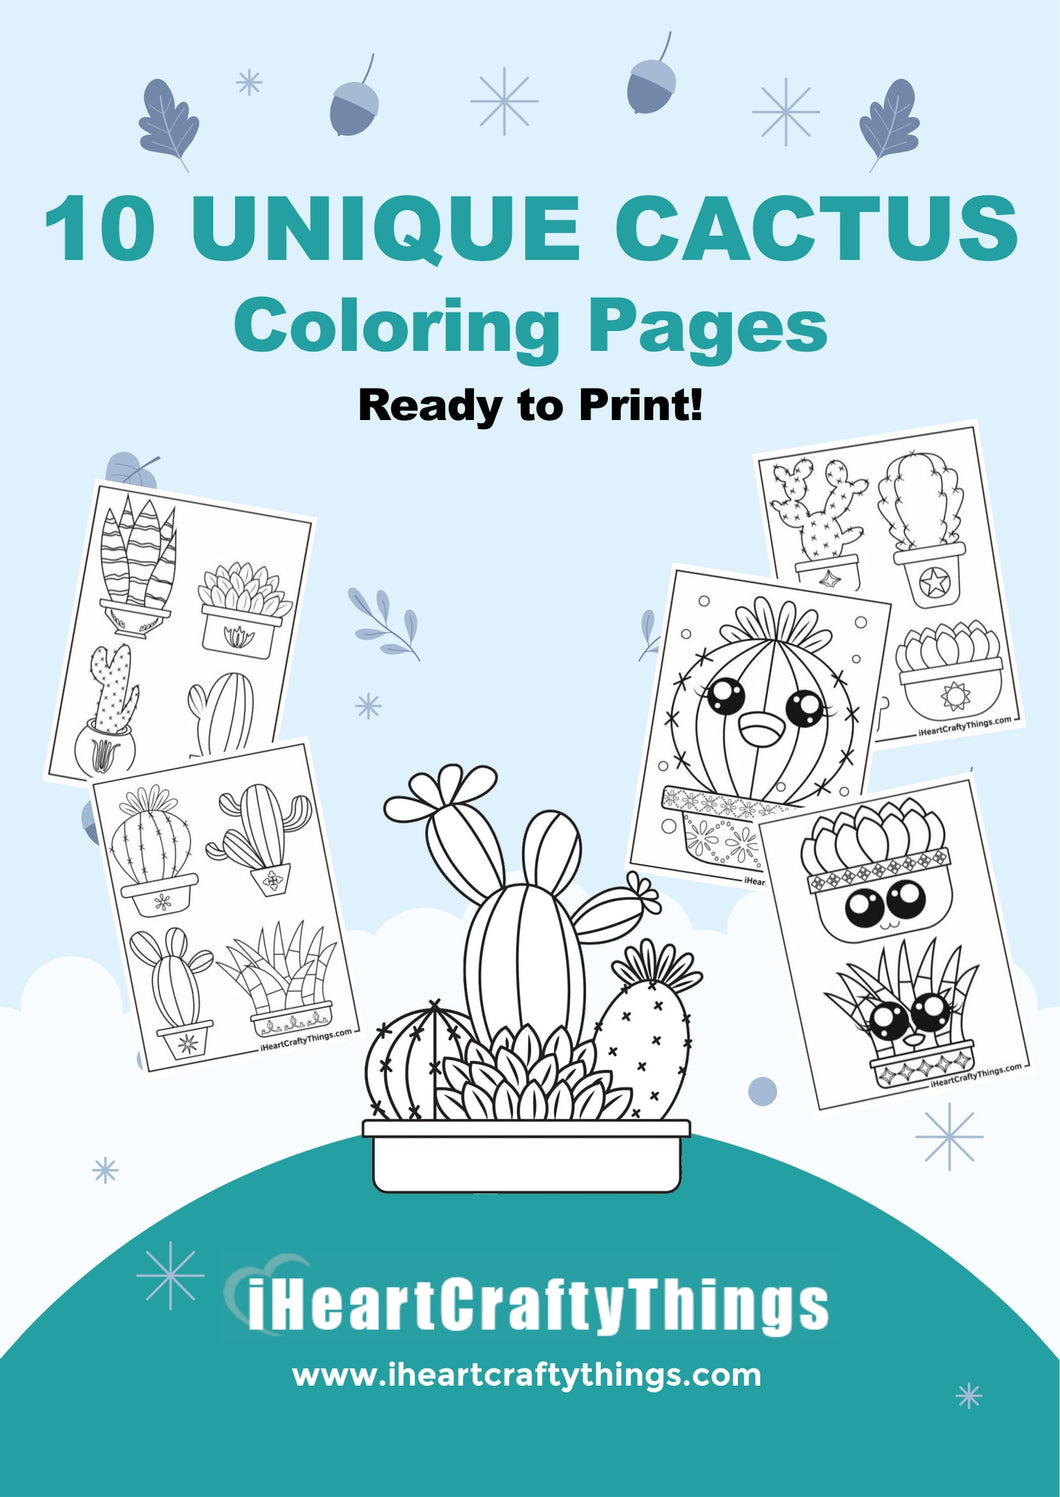 10 CACTUS COLORING PAGES